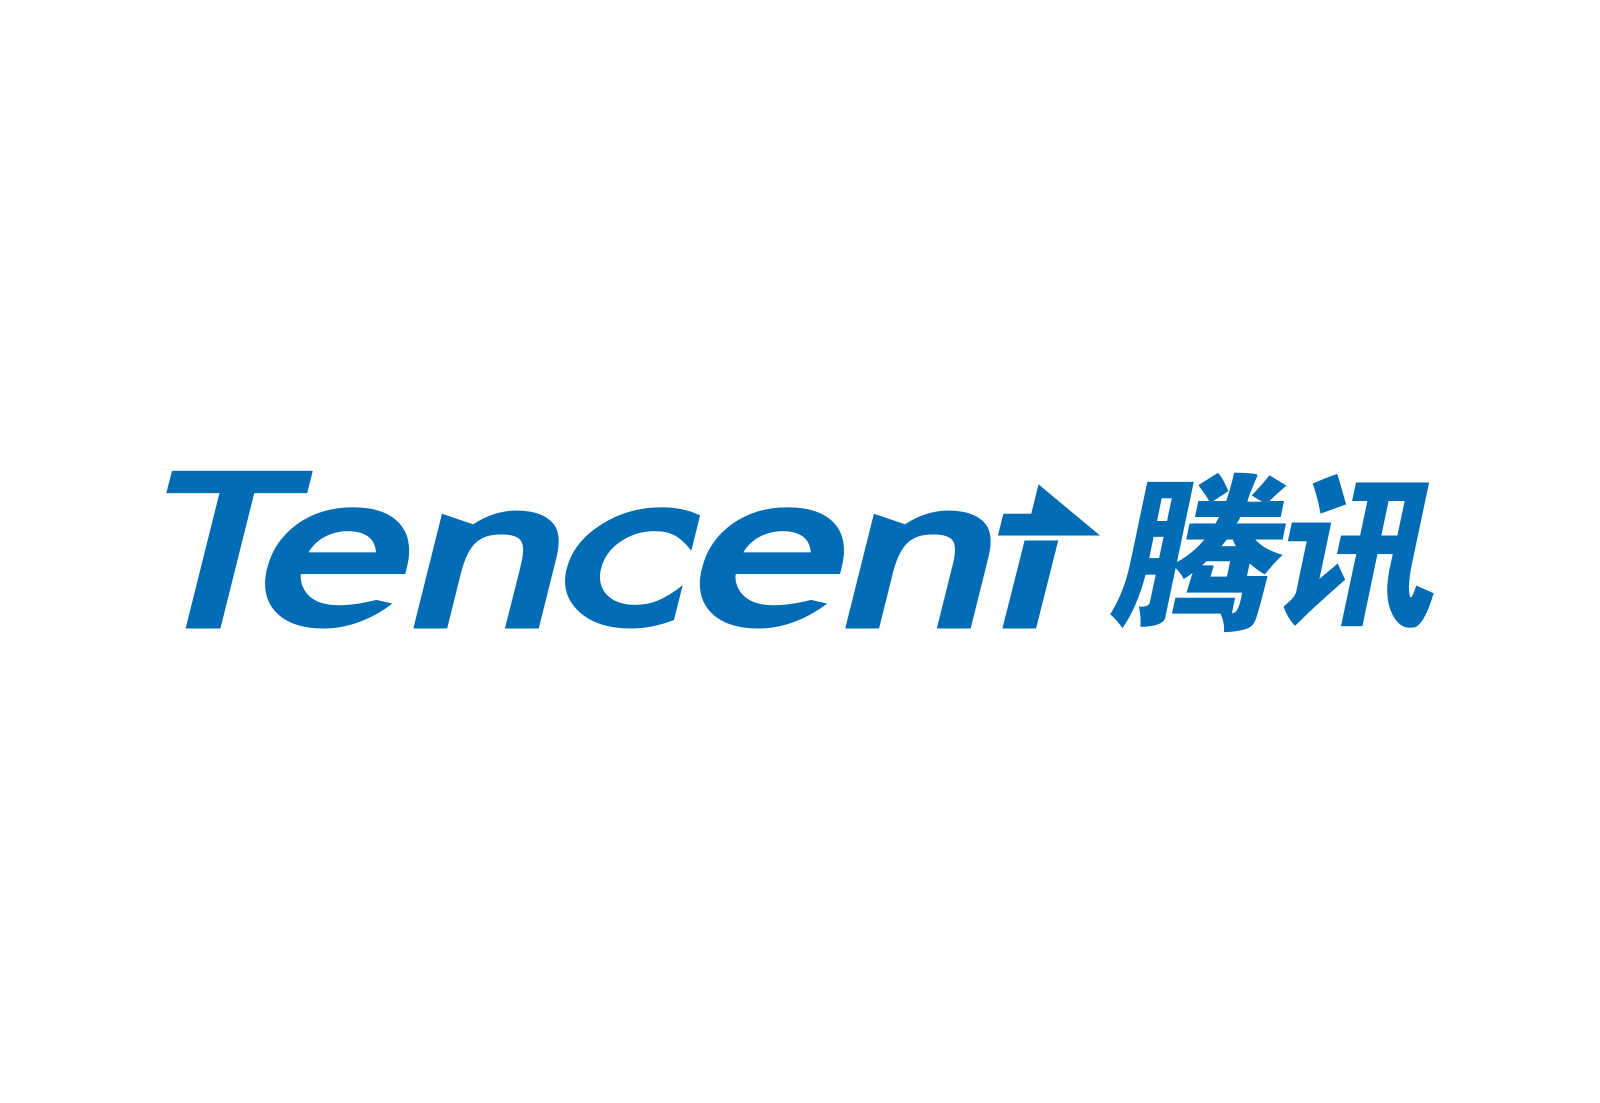 Tencentu0027s Revenue from On